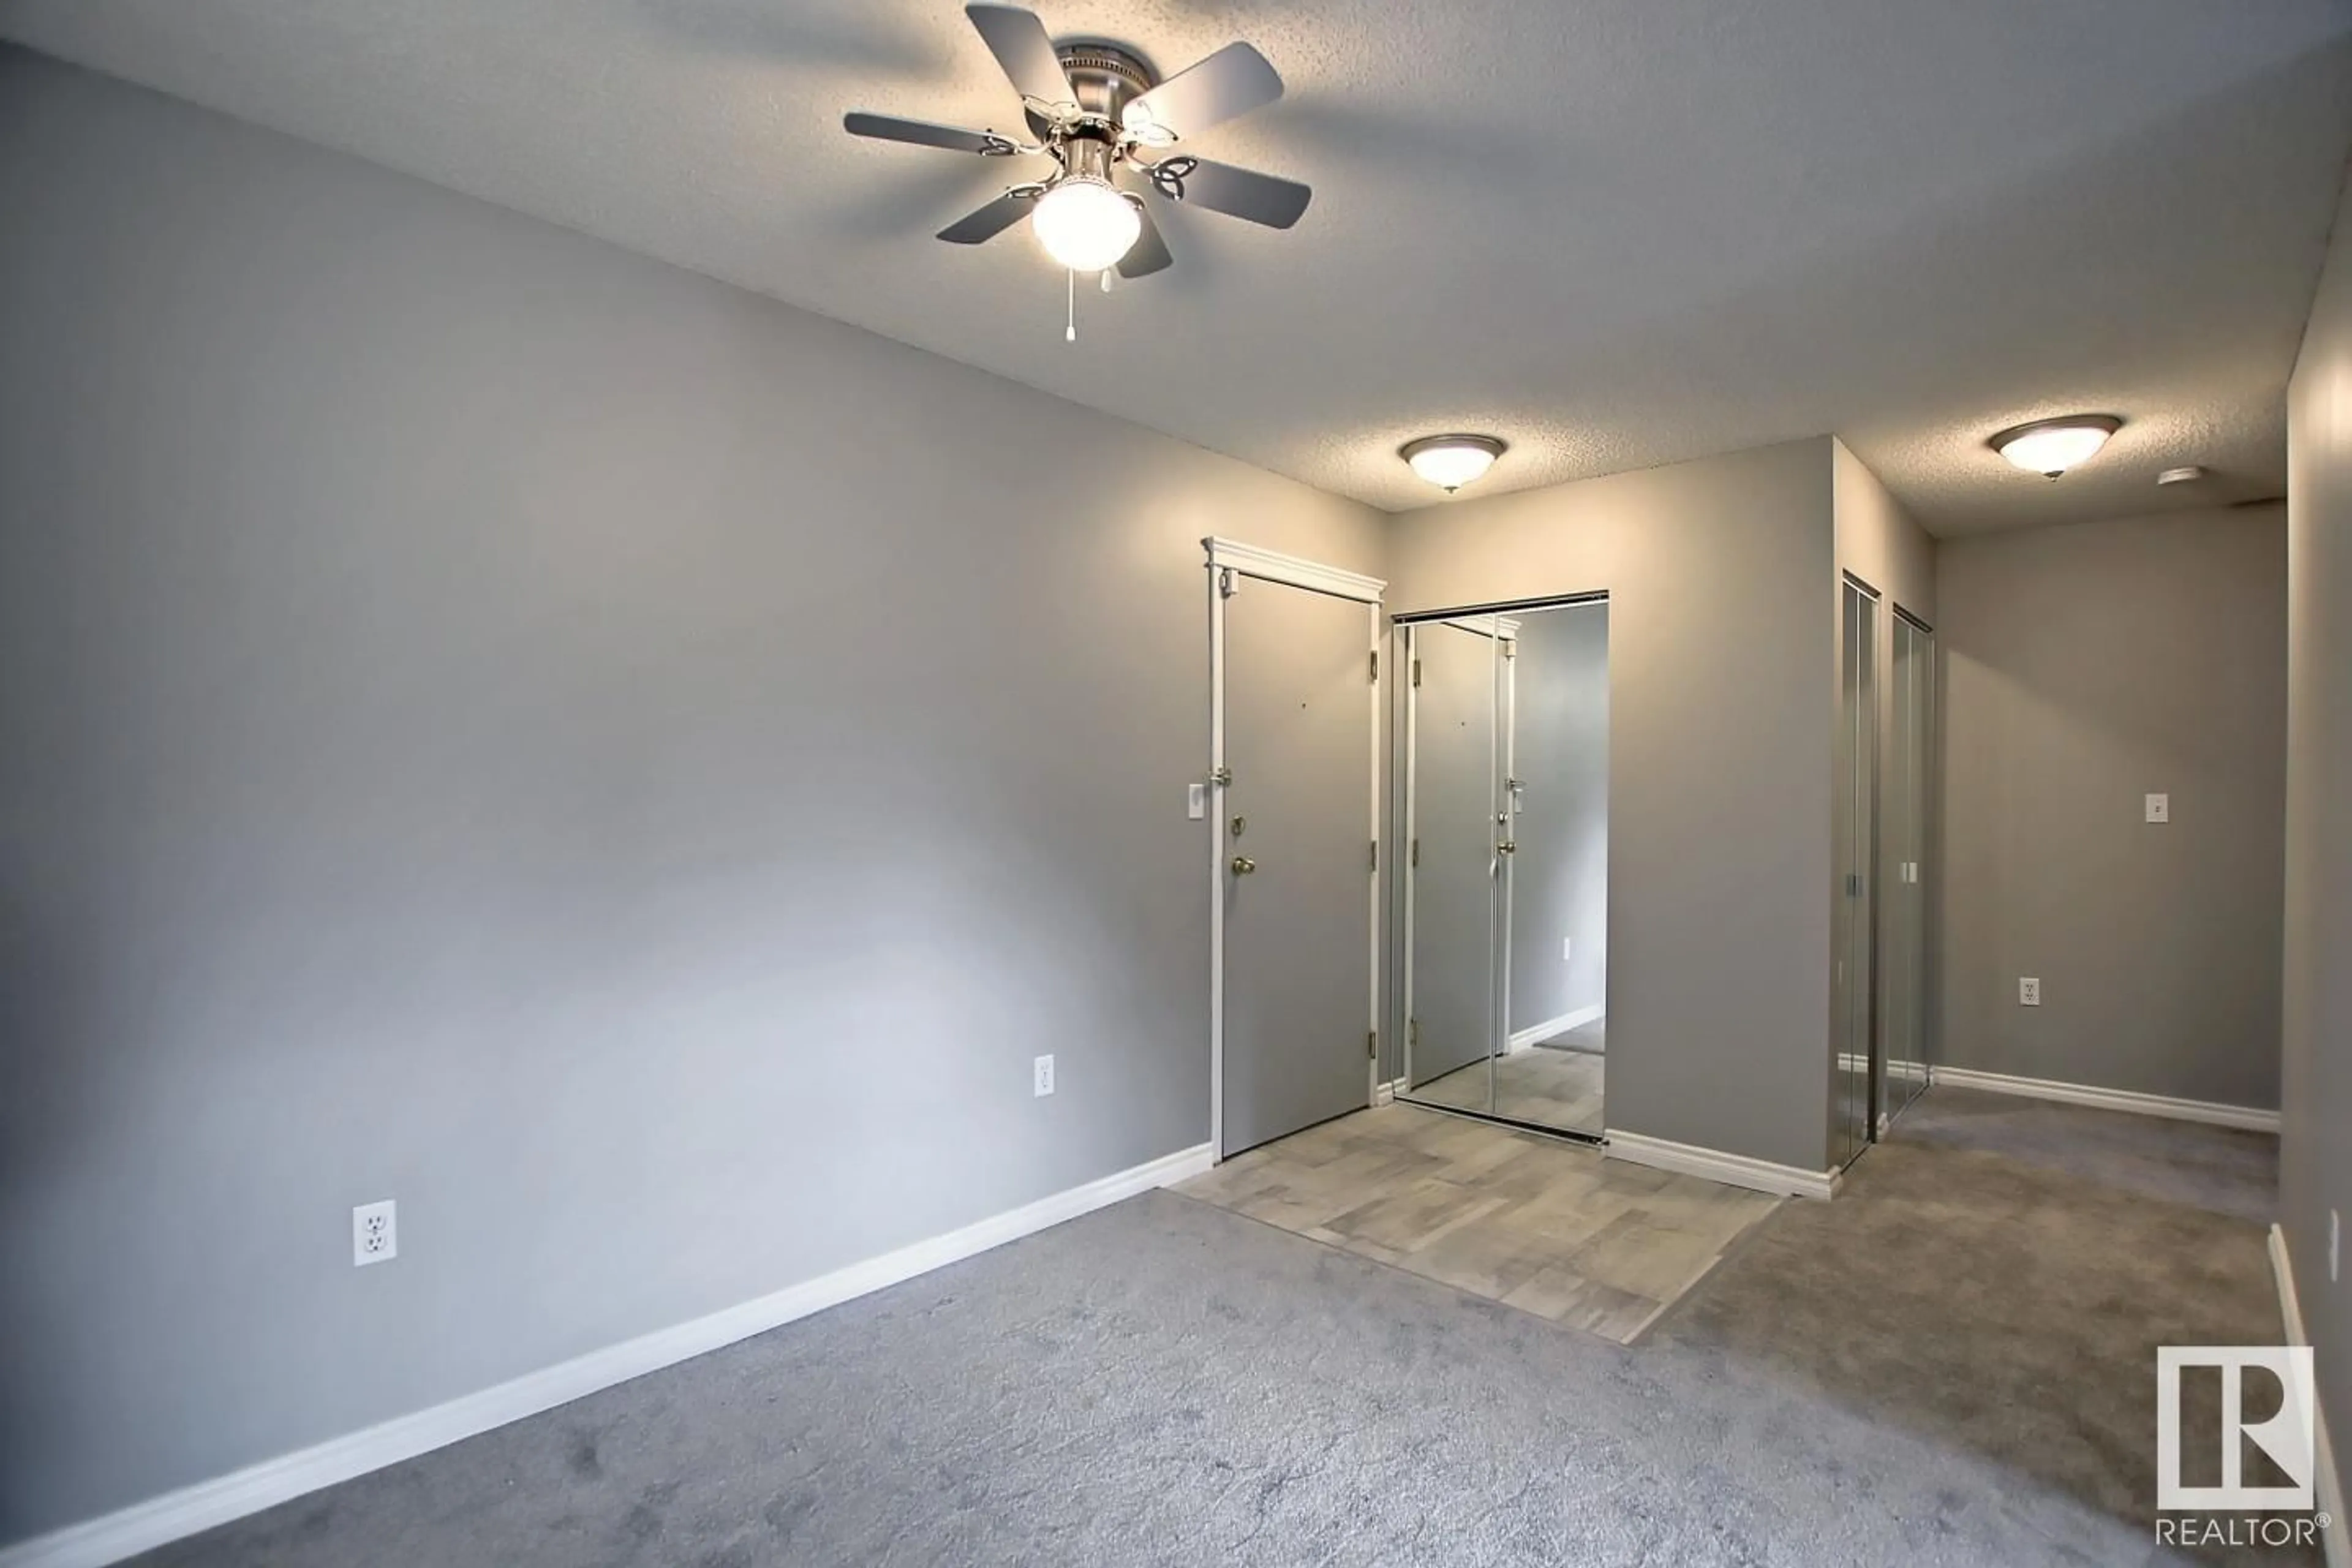 A pic of a room for #116 10636 120 ST NW, Edmonton Alberta T5H4L5